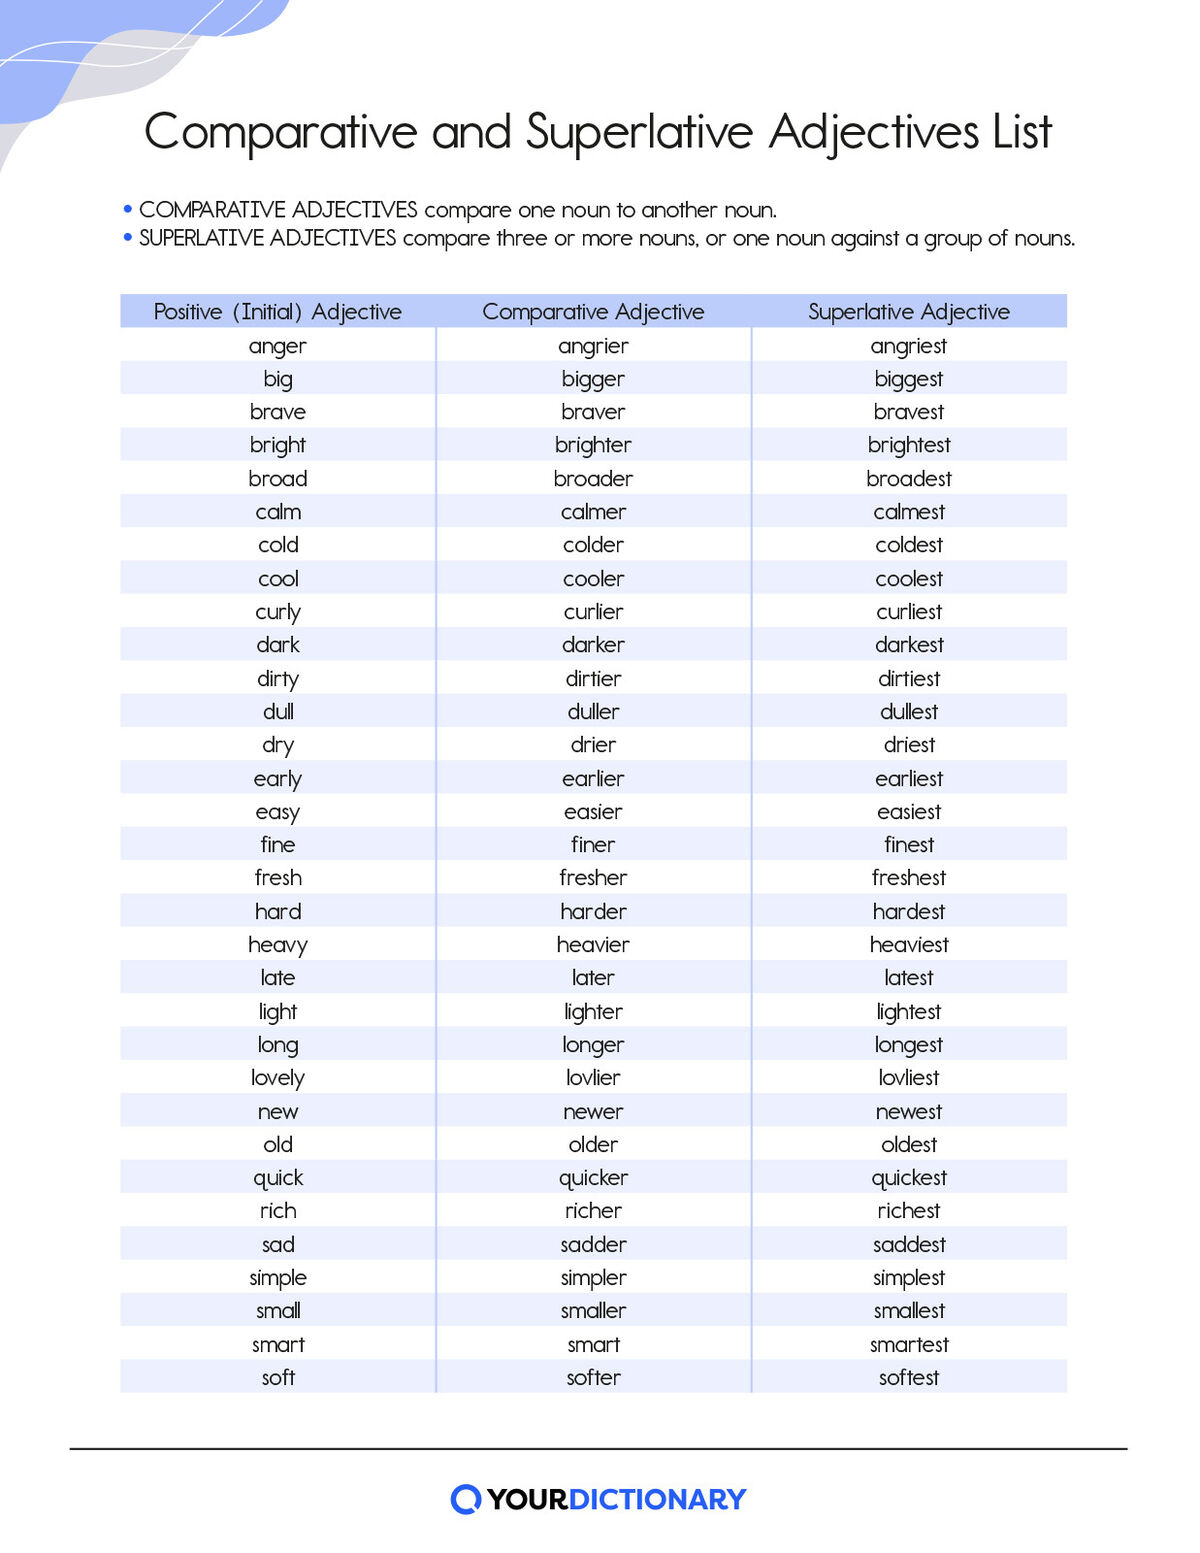 List of comparative and superlative adjectives